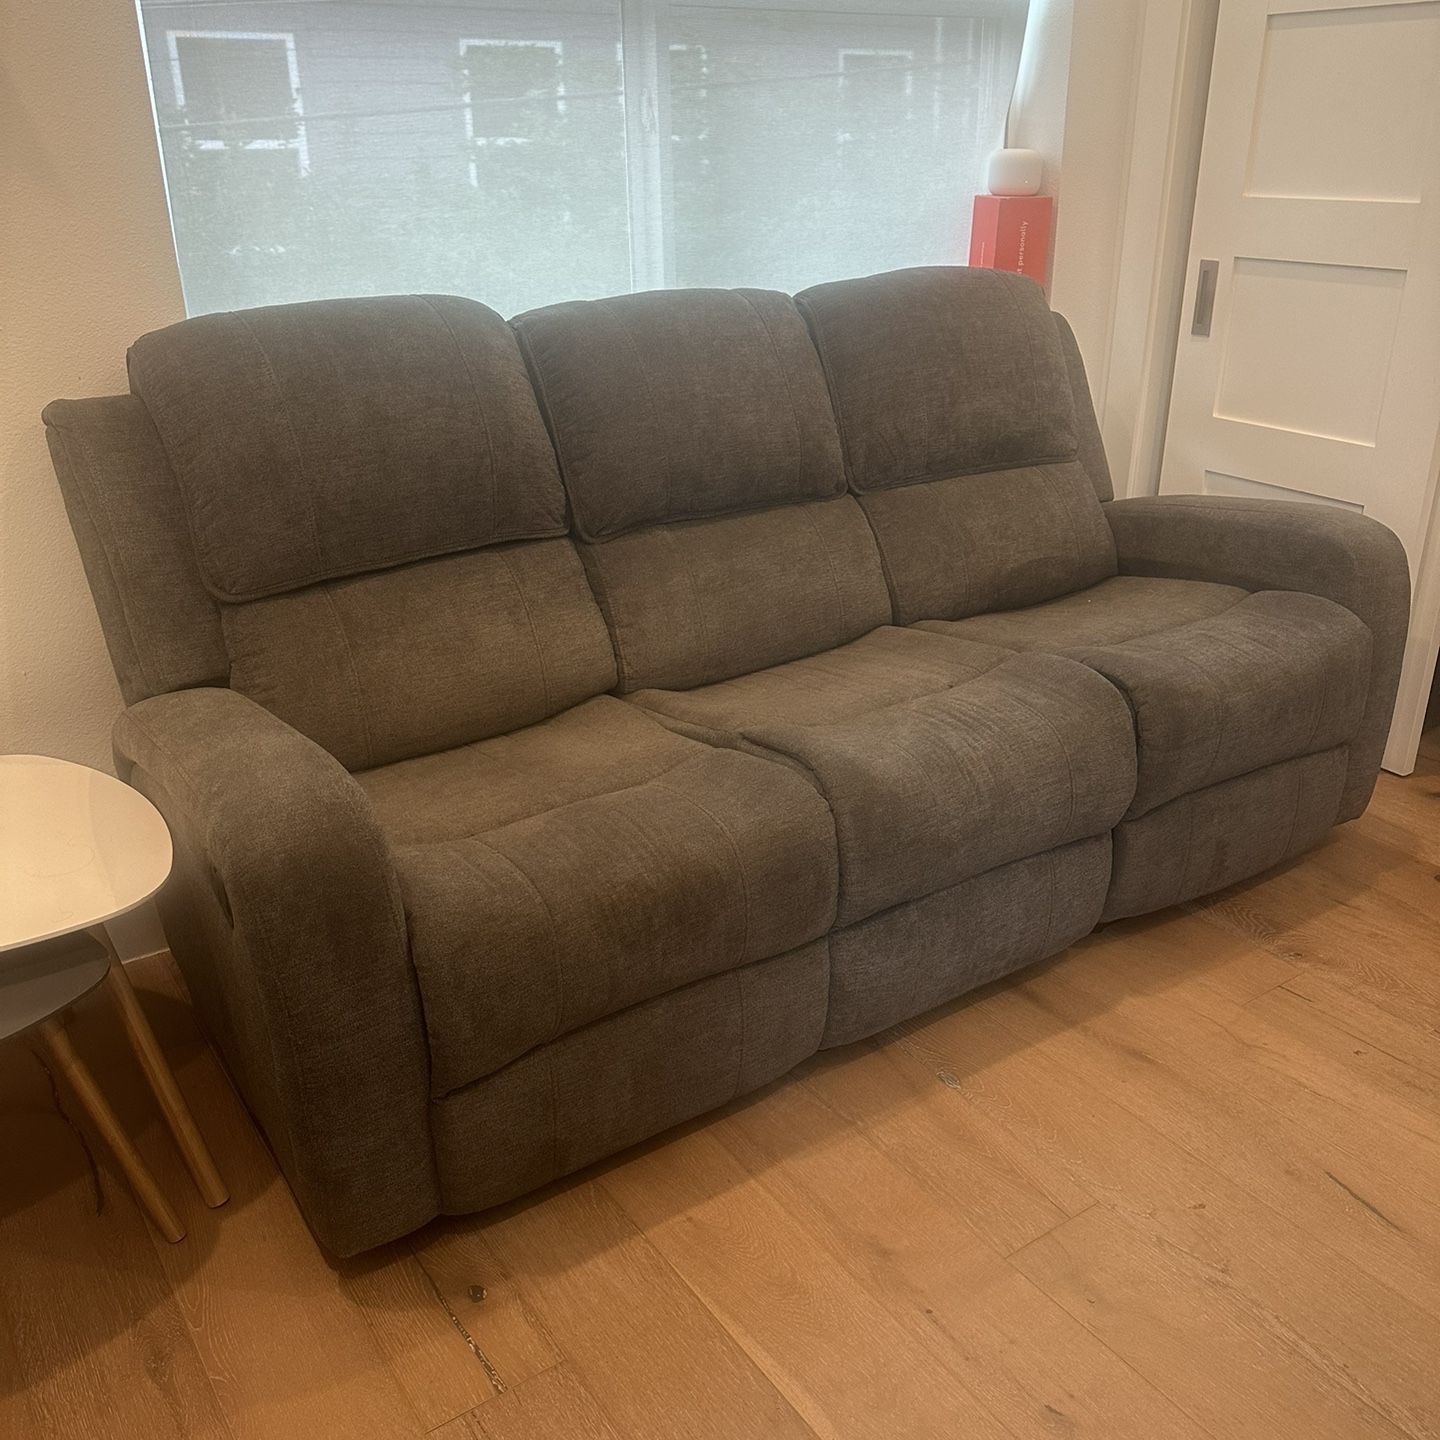 $350 OBO - Living Spaces Reclining Sofa